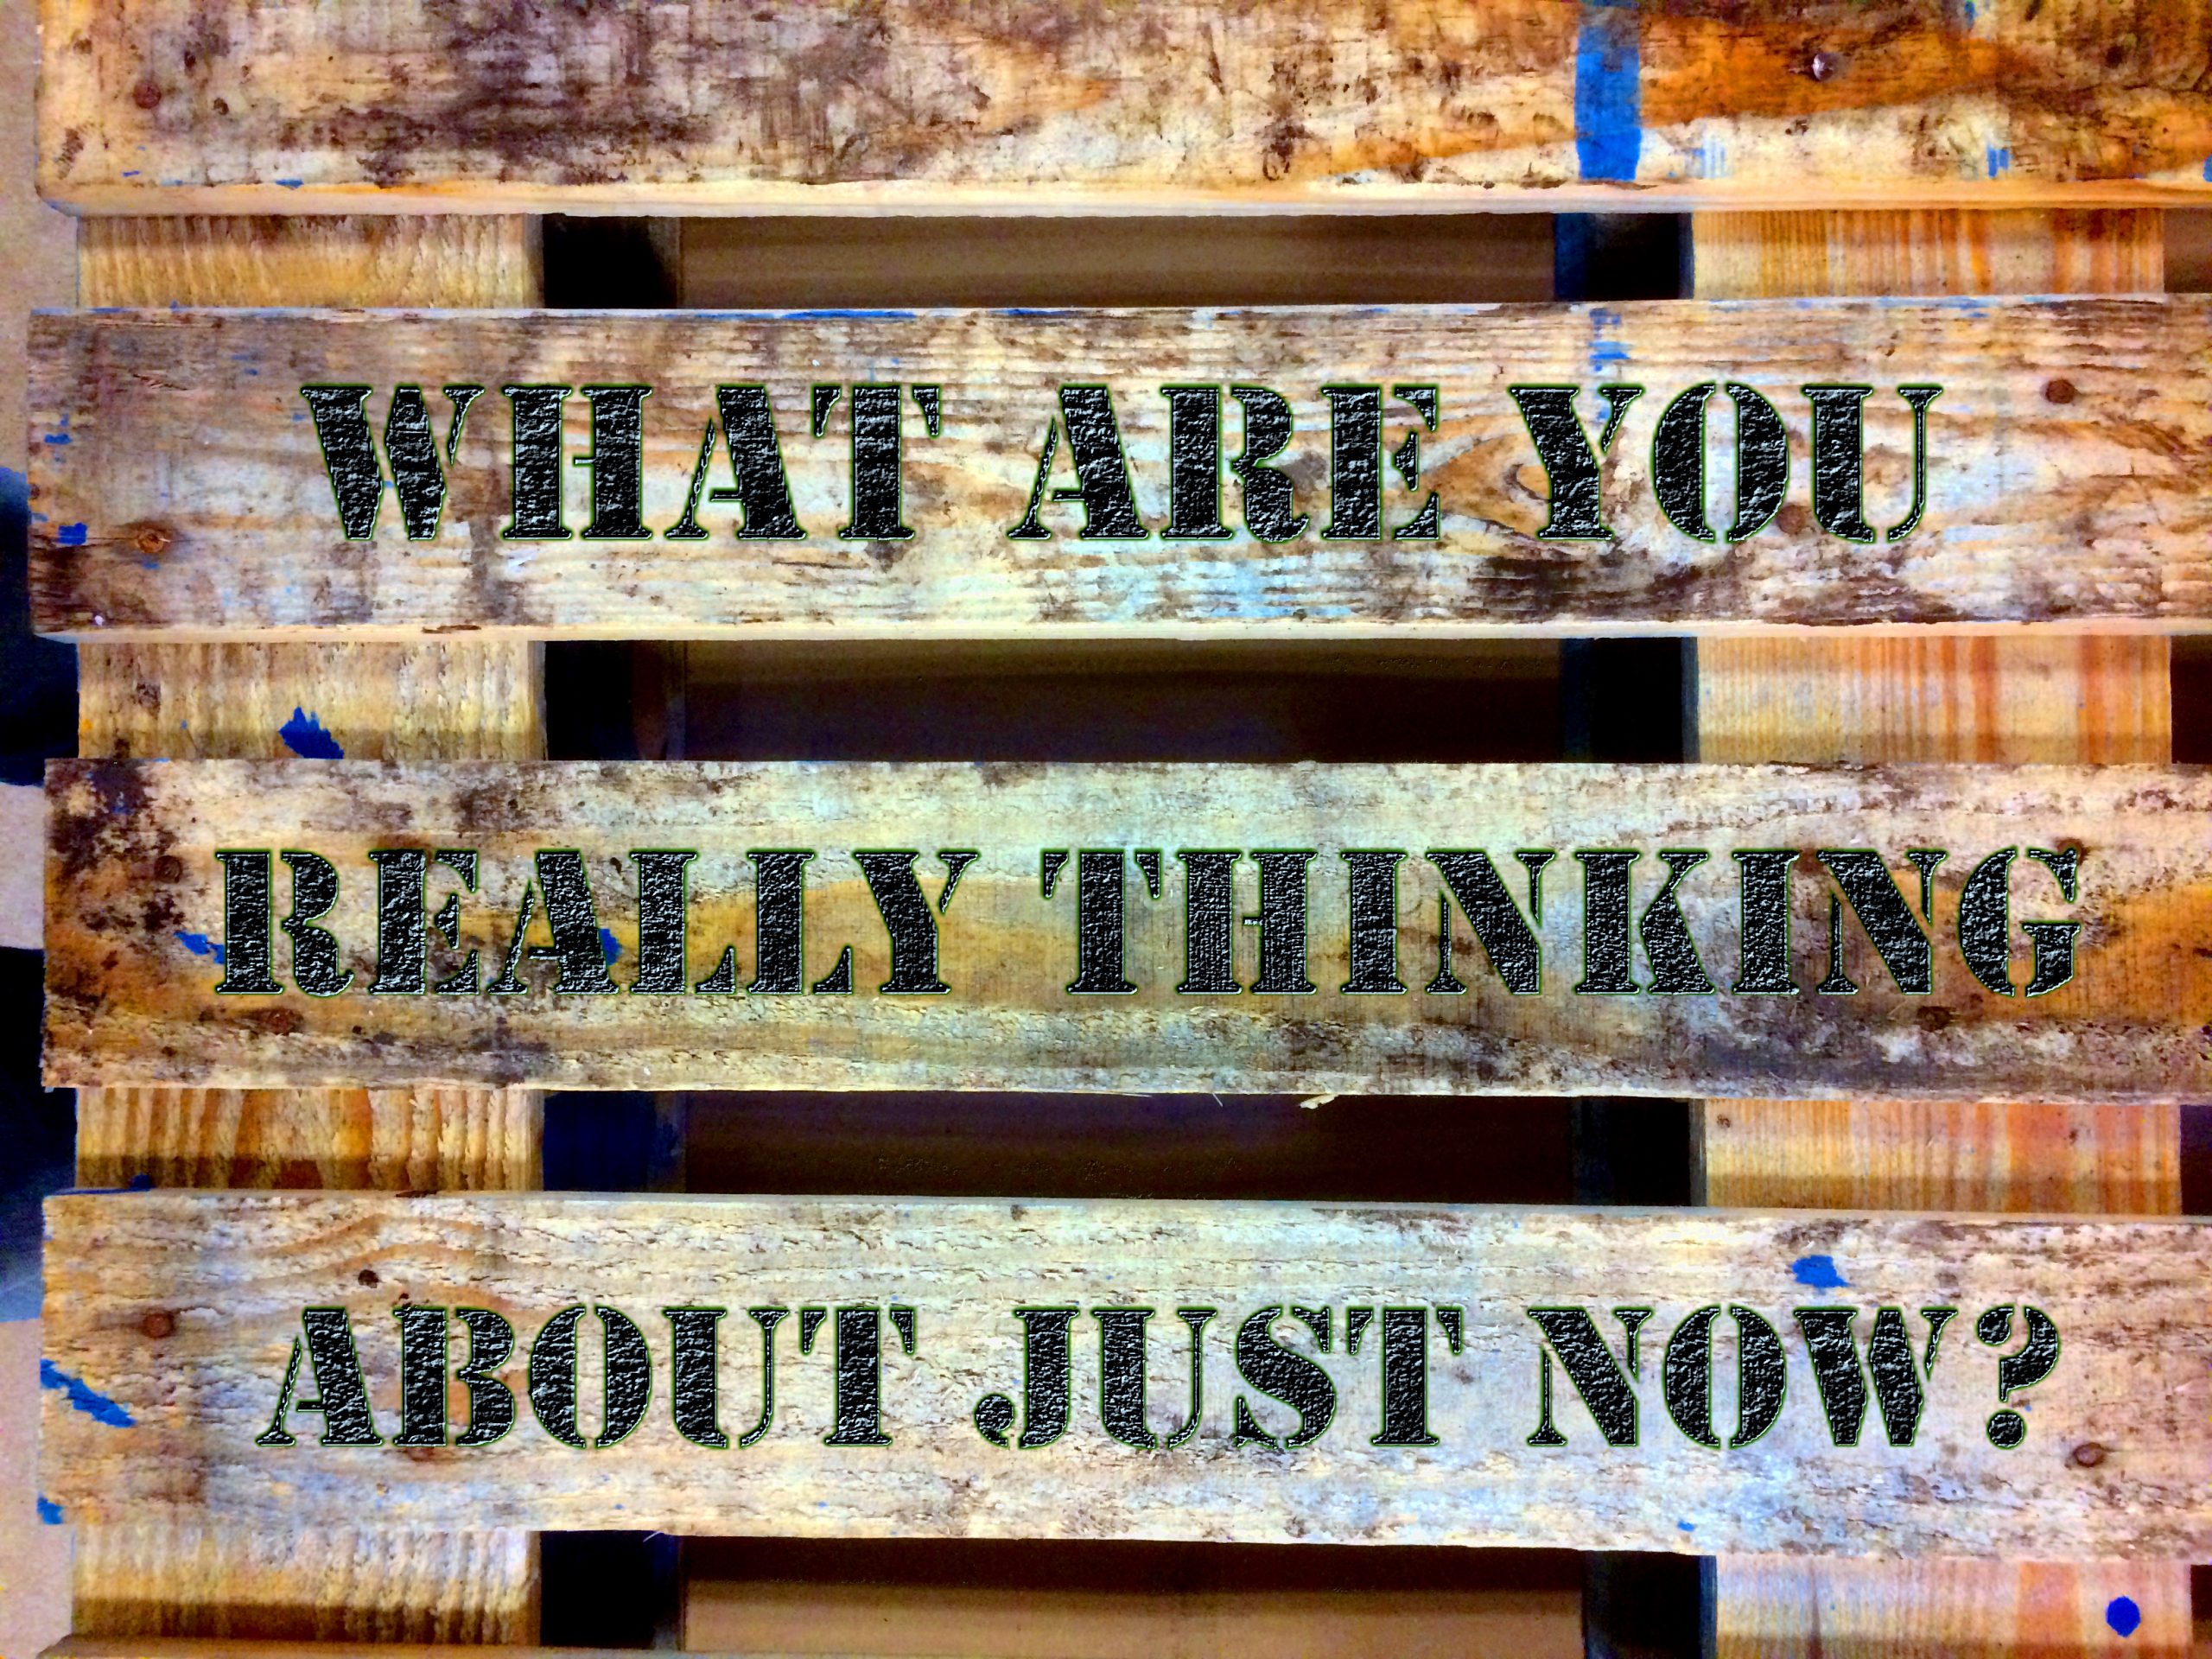 Wood sign saying "what are you thinking about just now?"